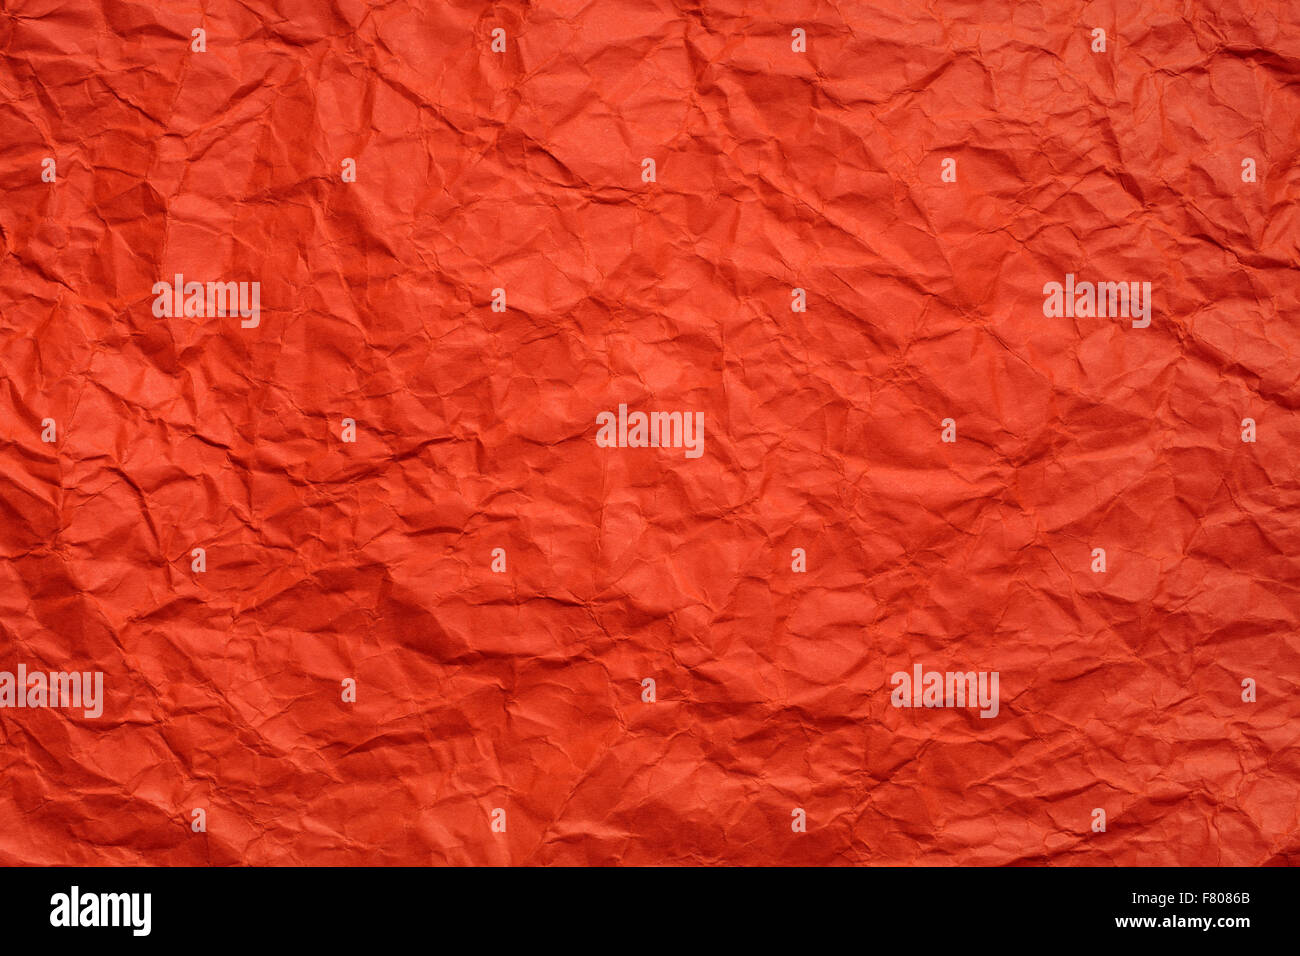 Detail of creased and wrinkled orange paper - Stock Image - F025/4940 -  Science Photo Library